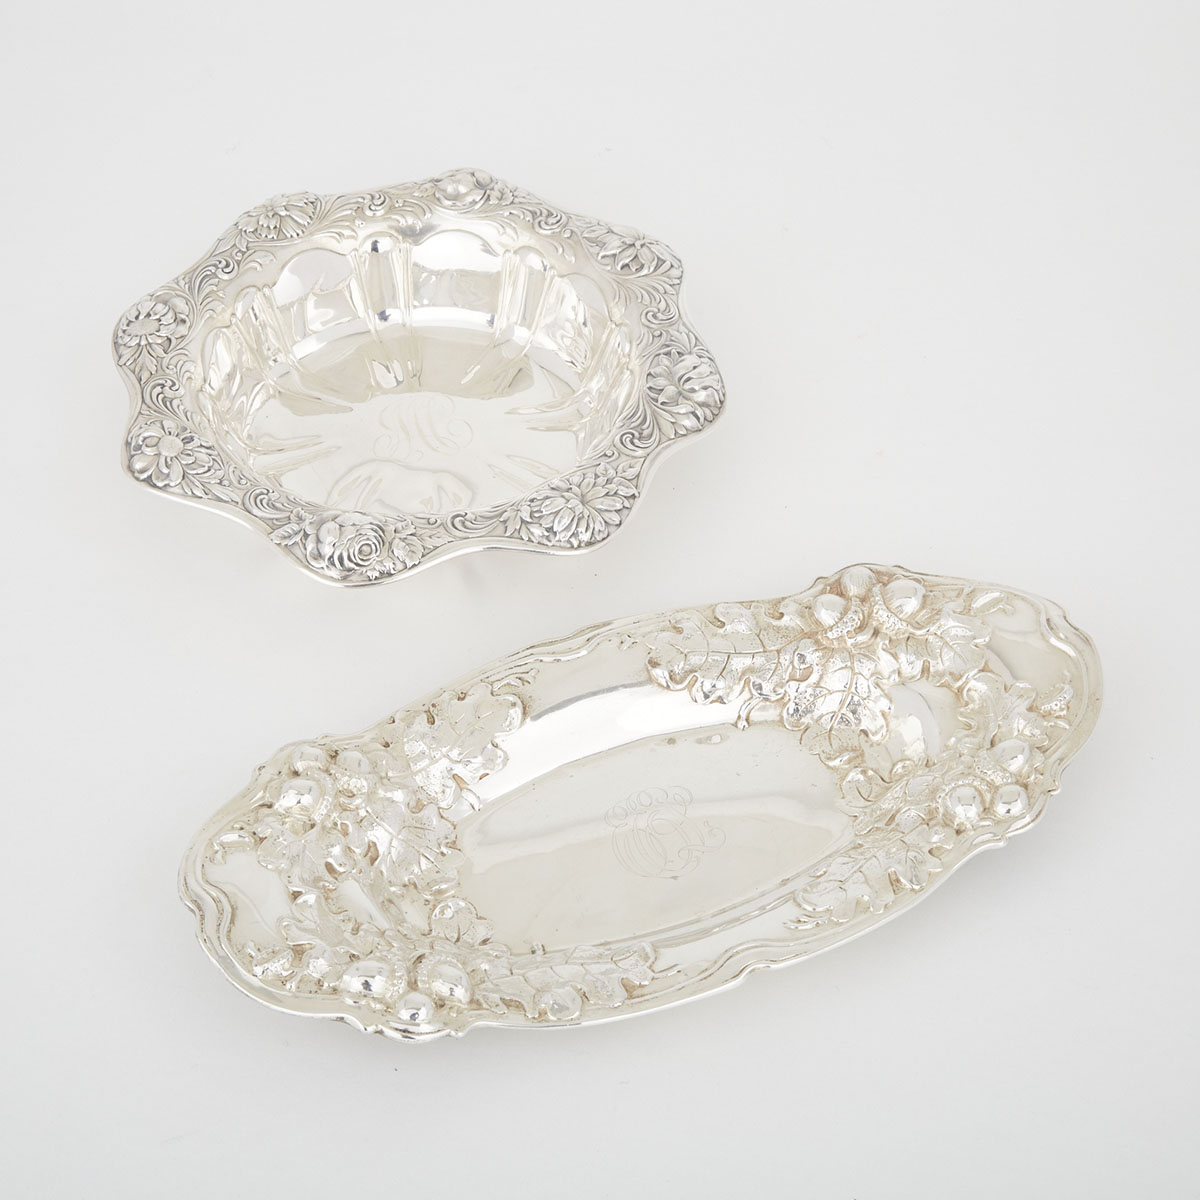 American Silver Berry Bowl and Bread Dish, Gorham Mfg. Co., Providence, R.I., 1903/07